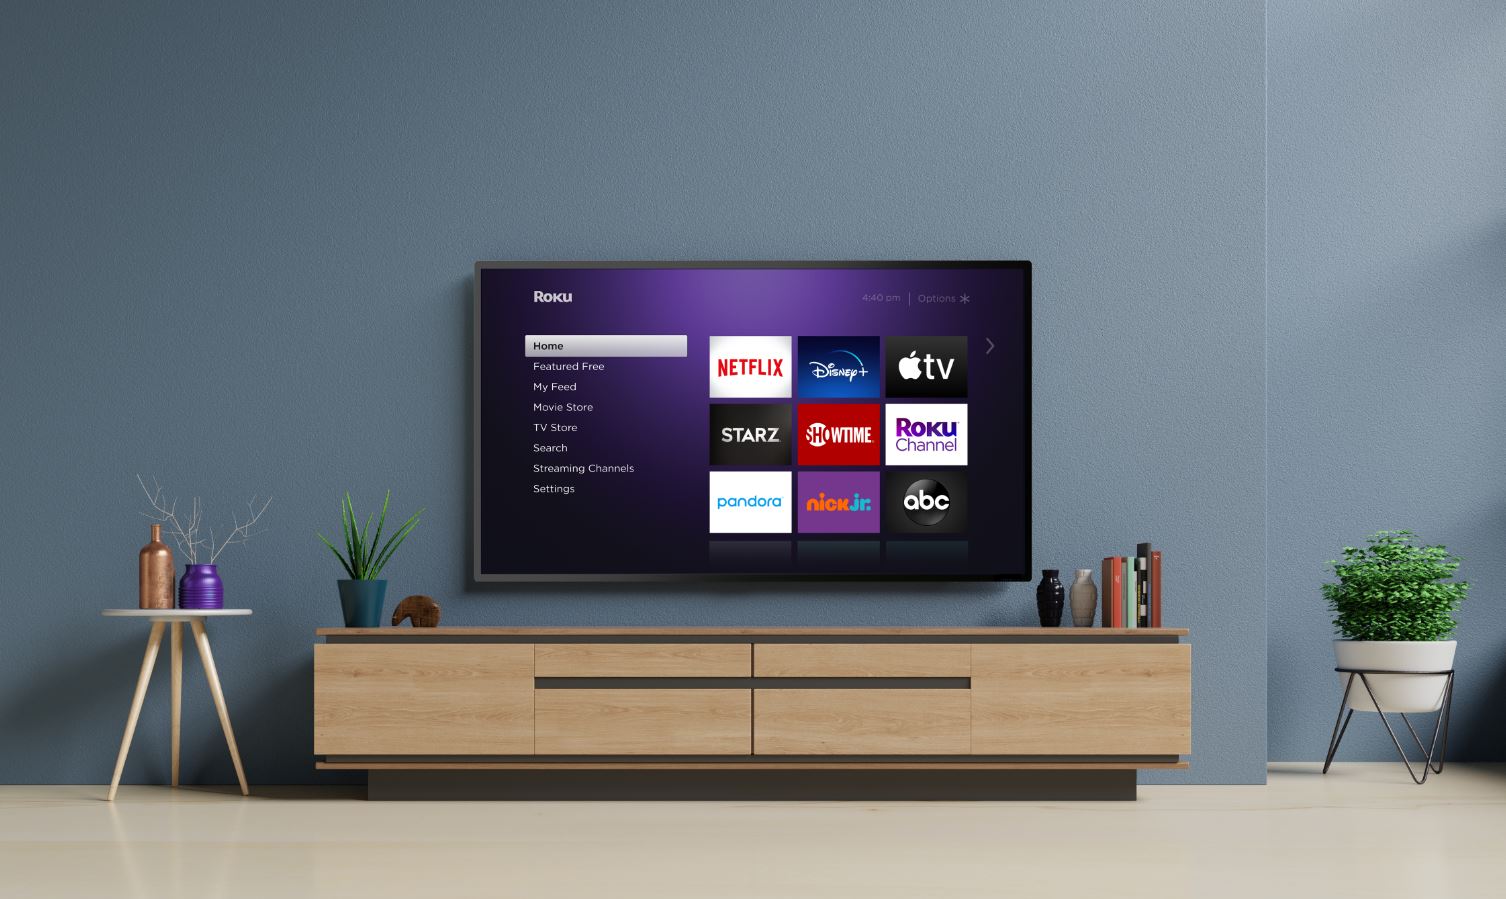 How to watch and stream From - 2022-2023 on Roku